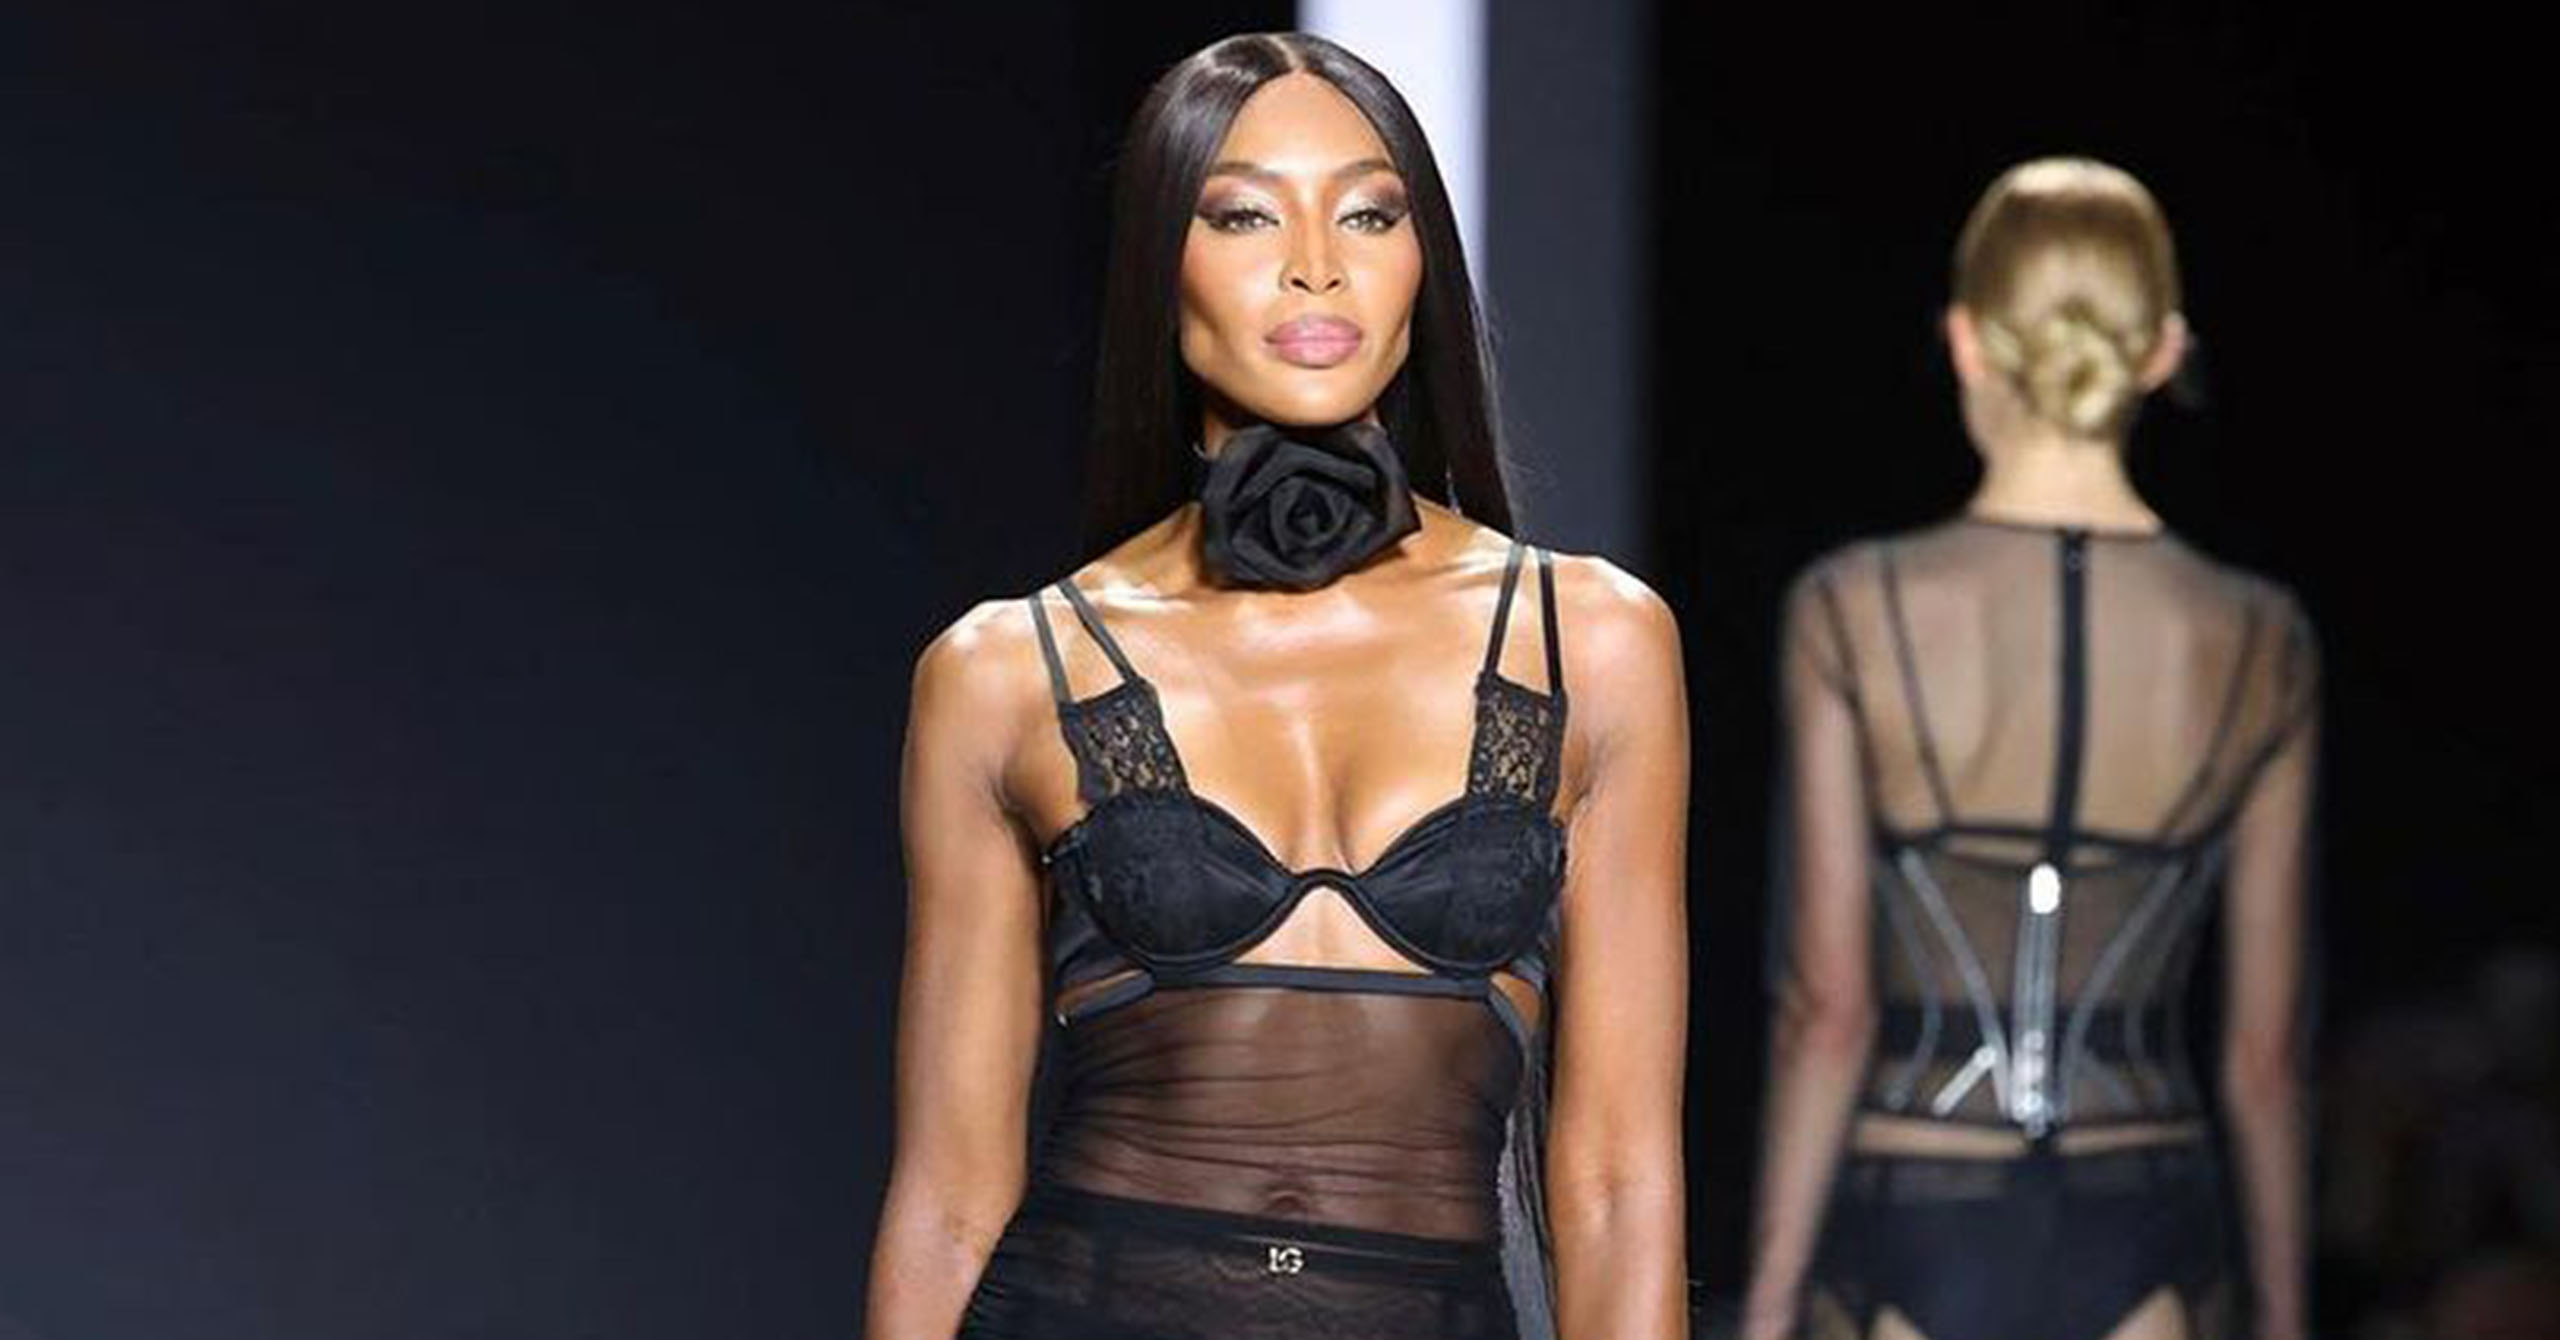 Naomi Campbell's latest lingerie campaign shows a different side